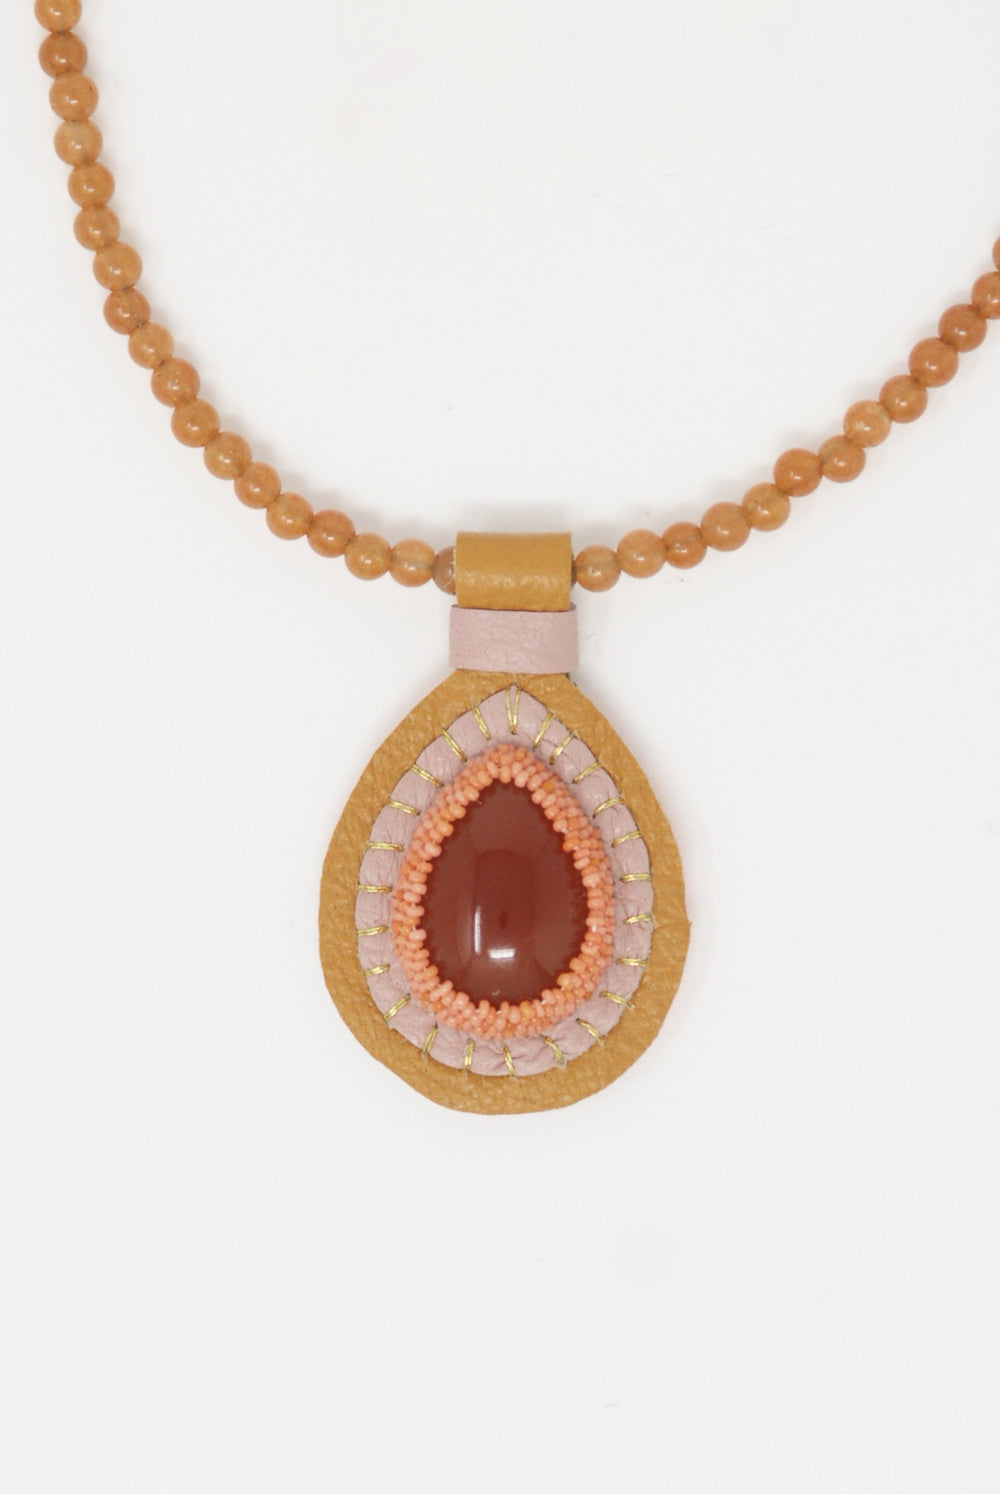 Robin Mollicone - Charm Necklace in Carnelian detail view